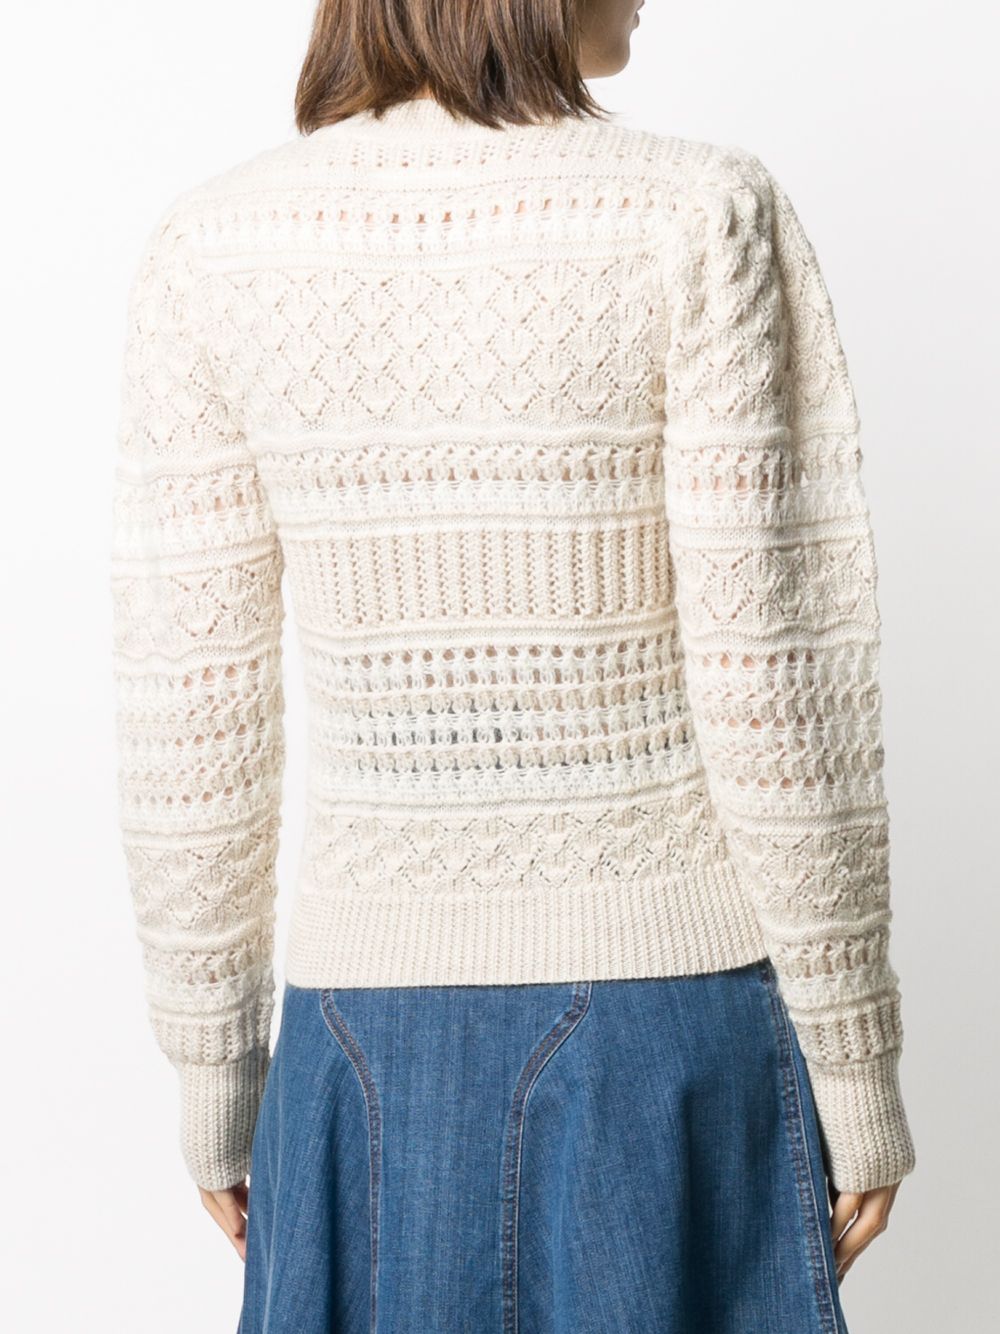 Shop Isabel Marant Étoile fine knit jumper with Express Delivery - FARFETCH